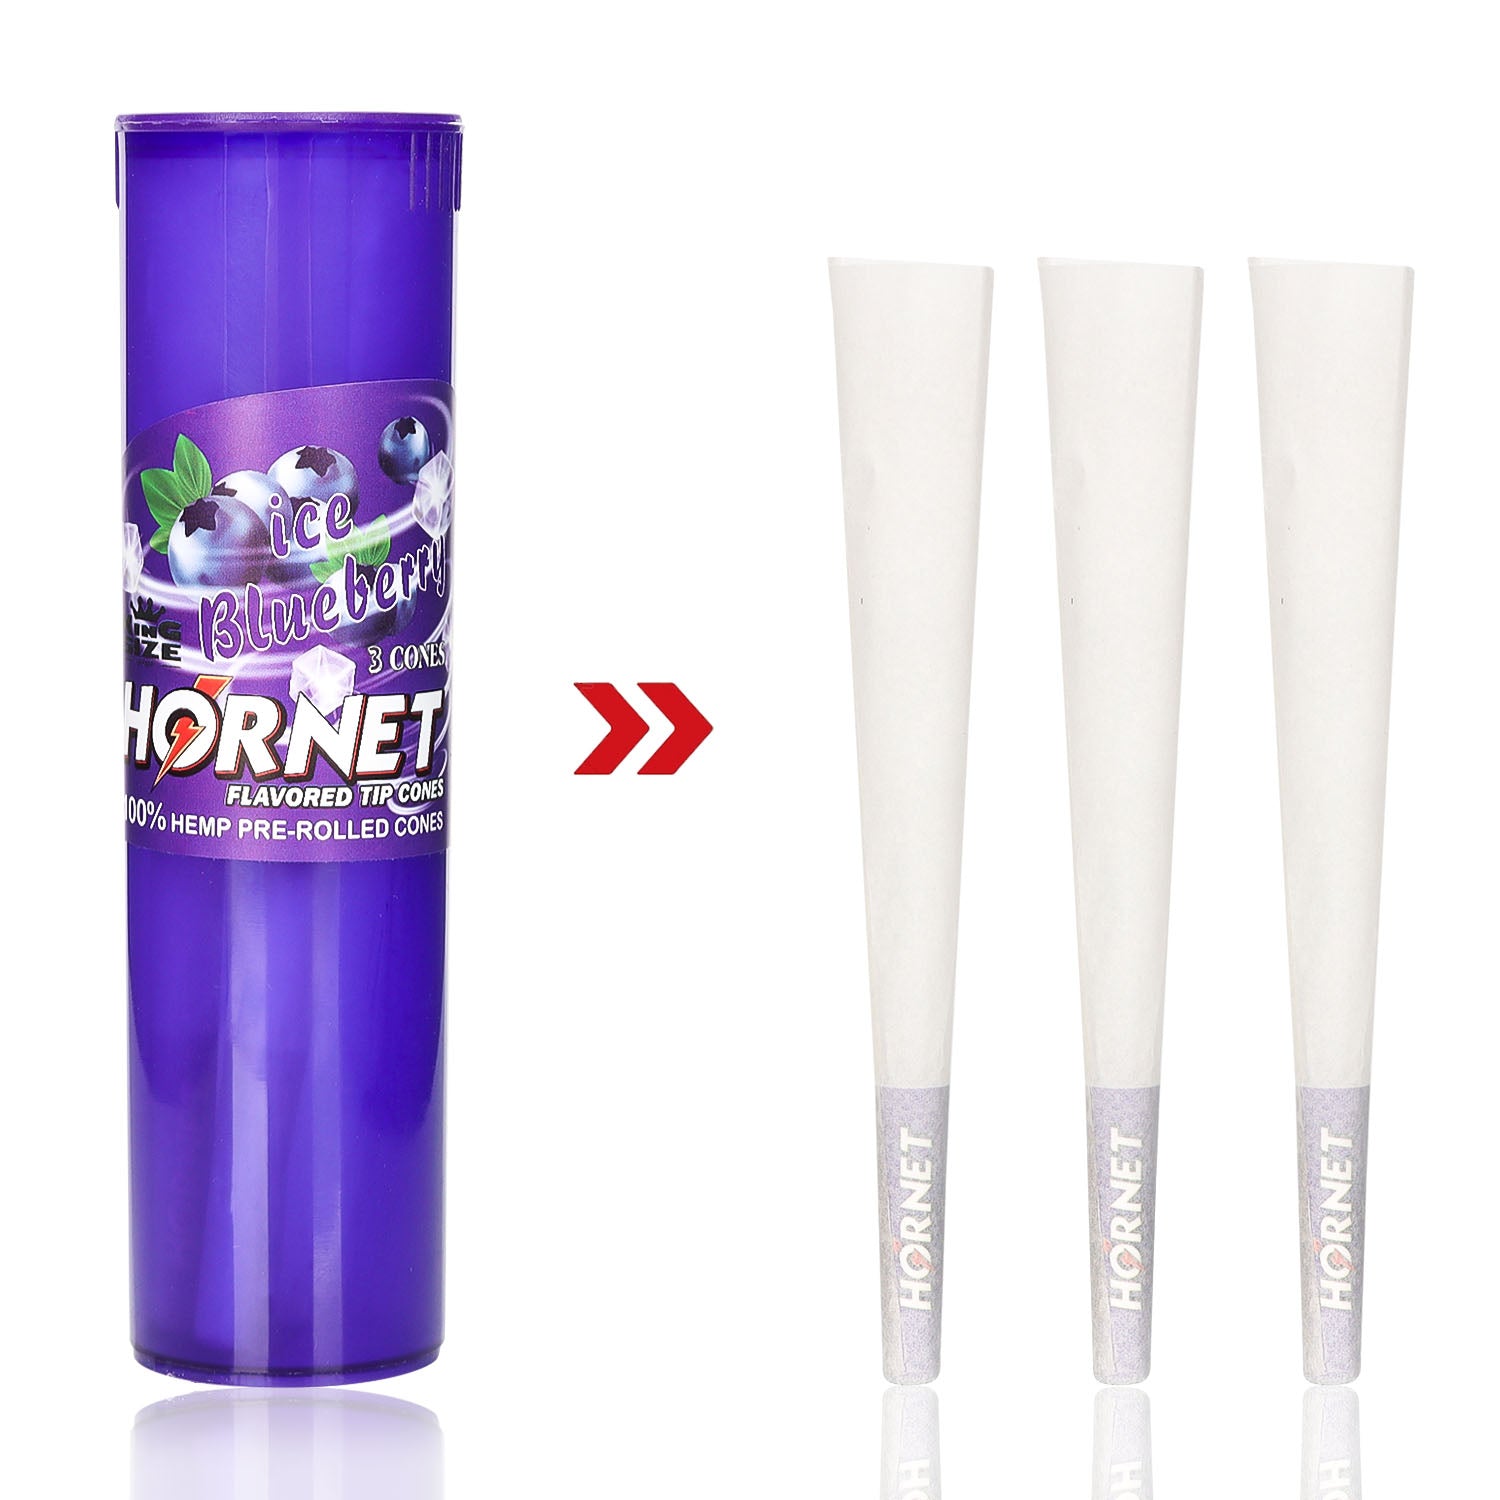 HORNET Blueberry Flavors Pre Rolled Cones, King Size Pre Rolled Rolling Paper With Tips, Slow Burning Rolling Cones & Flavored Pop, 3 PCS / Tube, 12 Tubes / Box